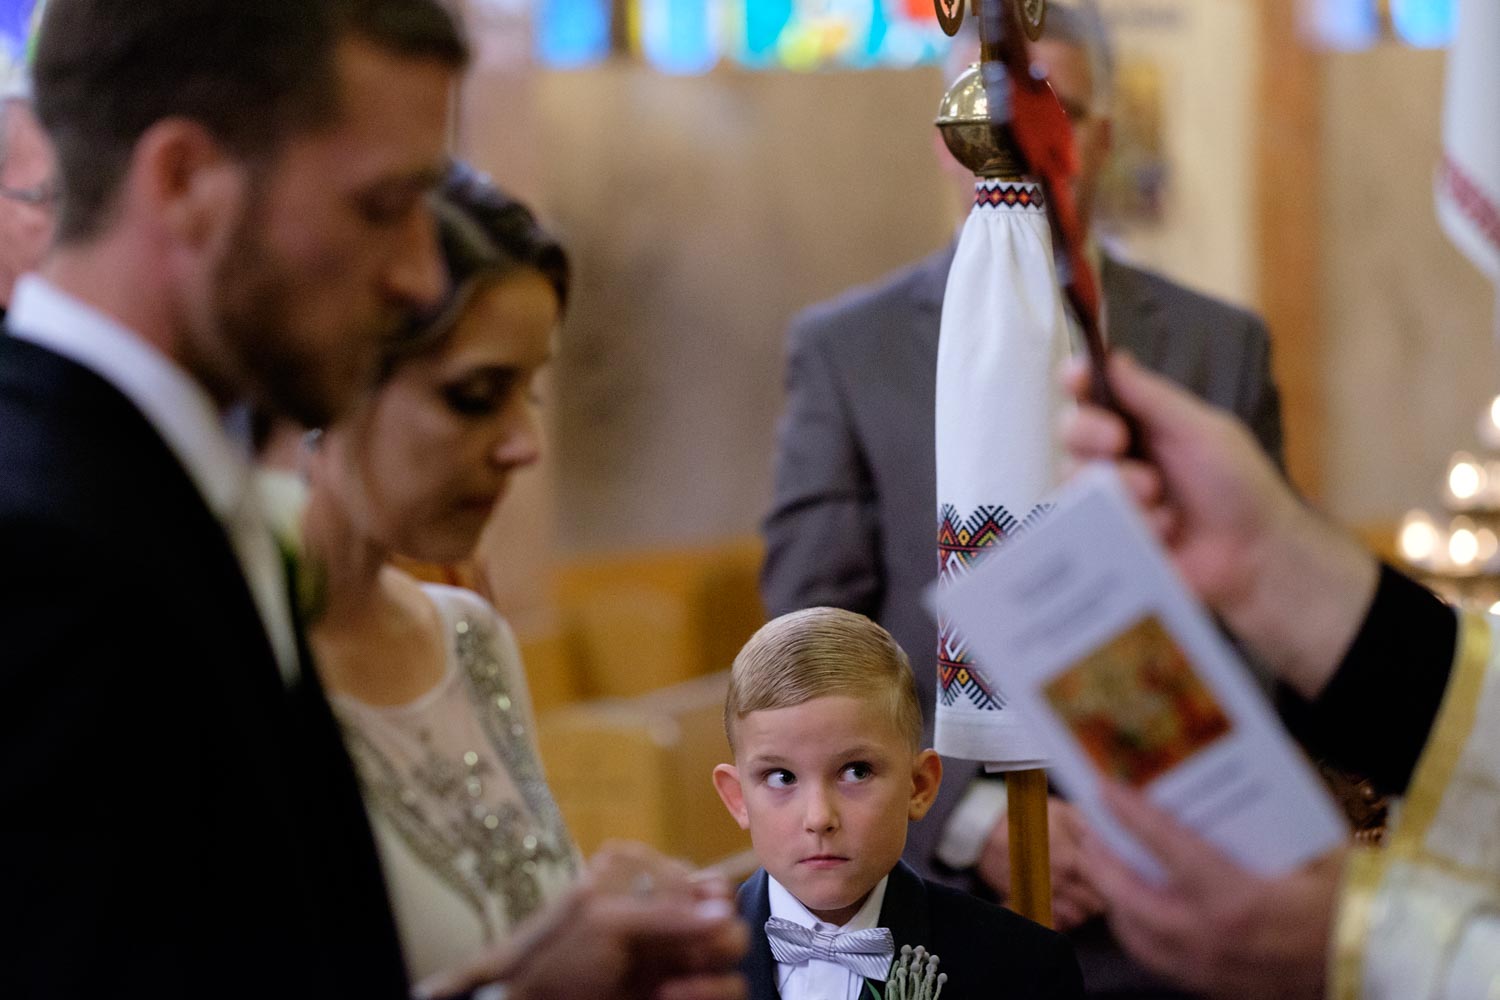  In my mind, this kid is thinking 'Dude, don't do it... girls are gross!' but him and his brother were two of the best behaved ring bearers I've ever seen. &nbsp; &nbsp;The stood still and kept quiet even during a long Orthodox ceremony... better the